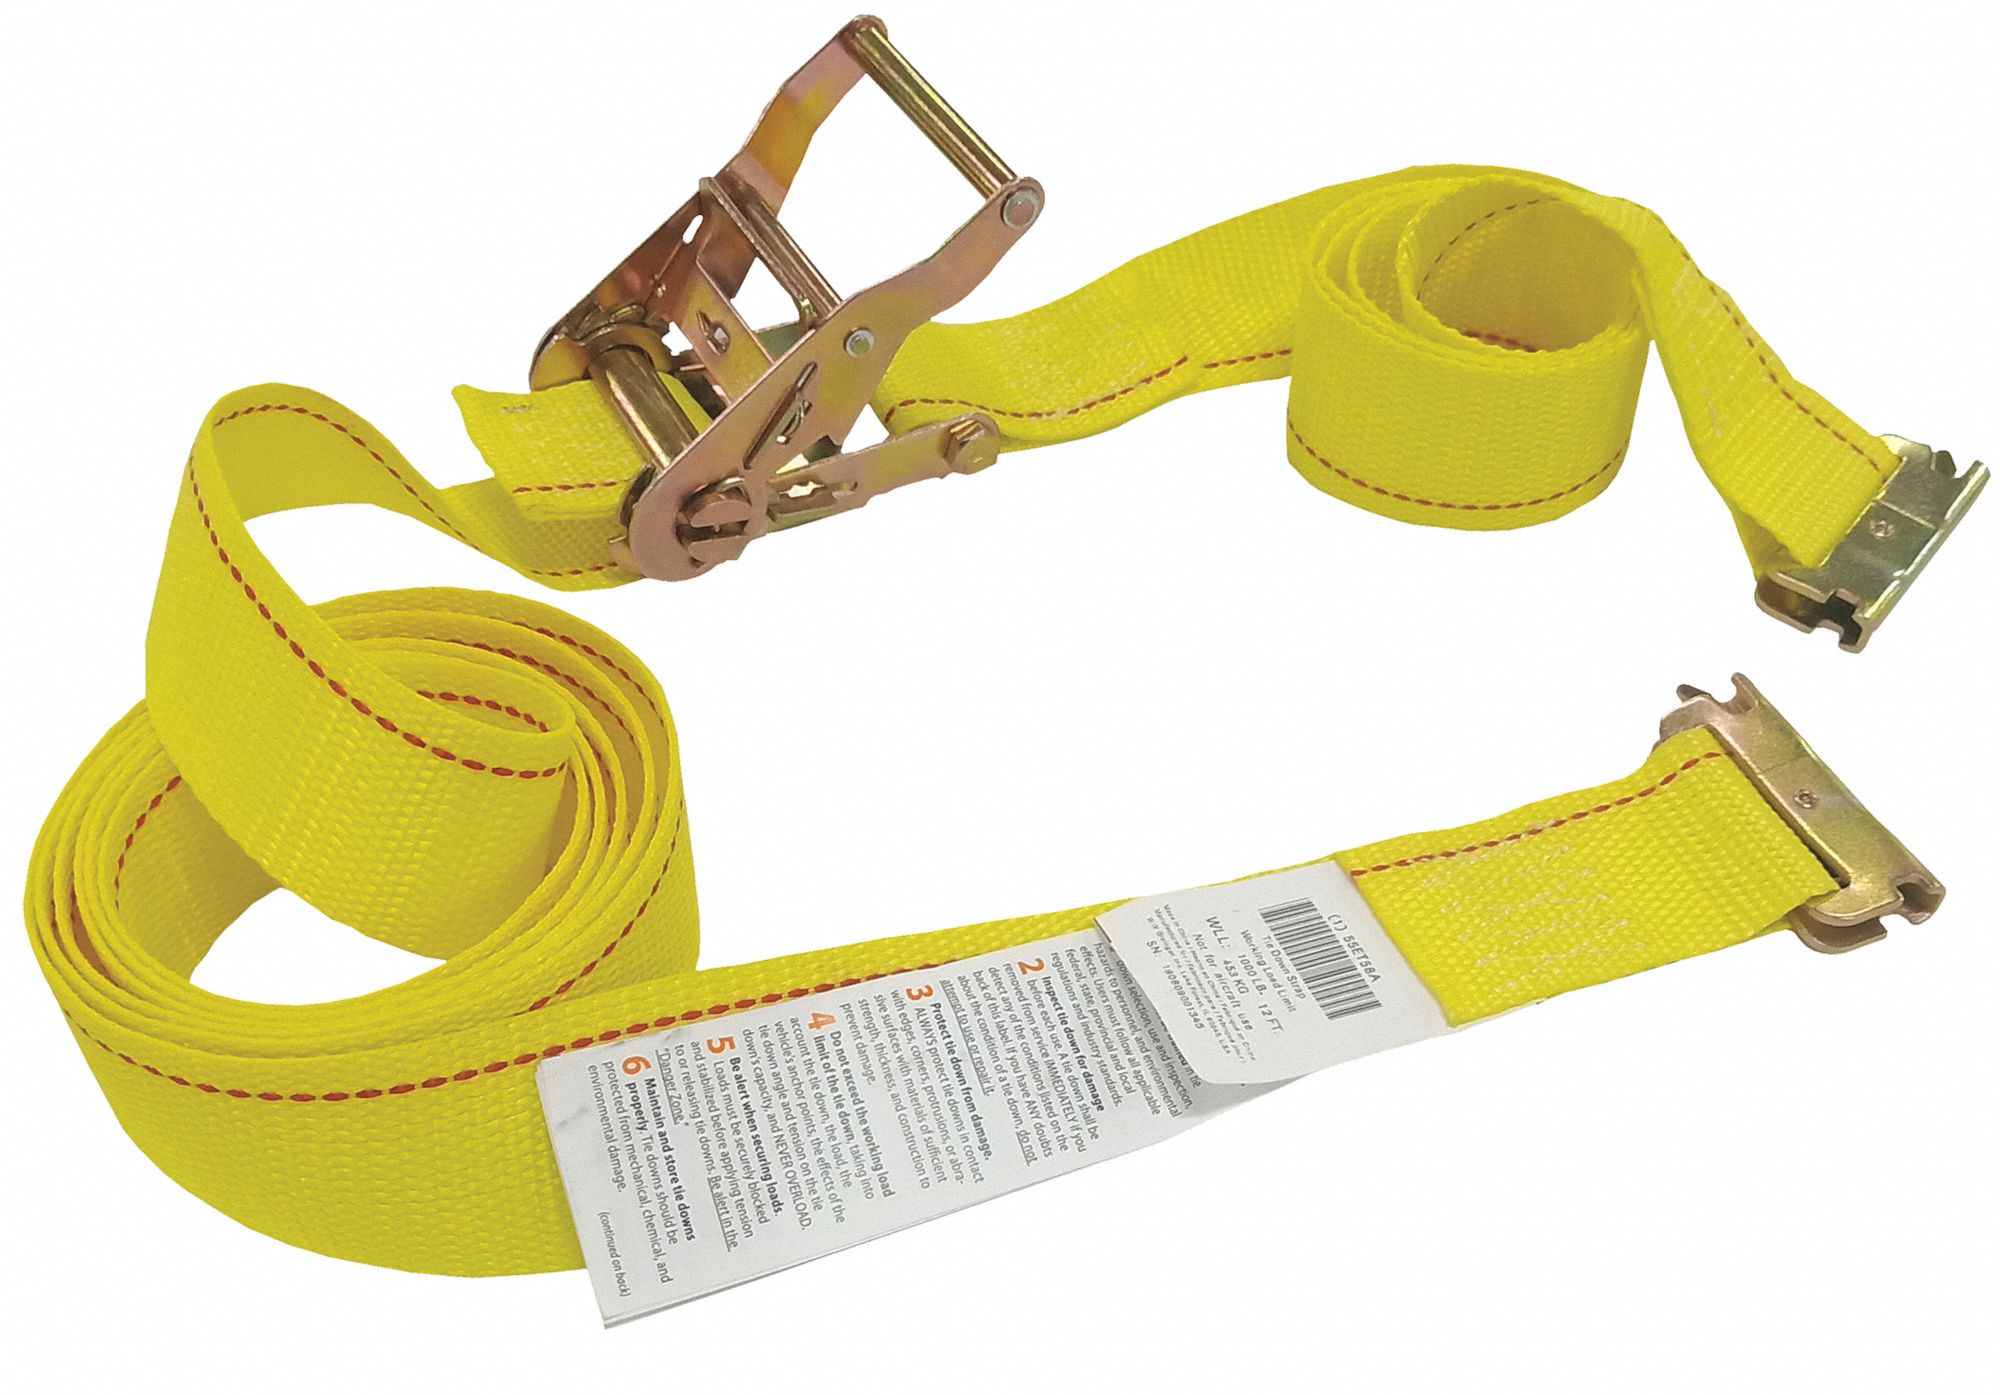 GRAINGER APPROVED Tie Down Strap, 12 ftL x 2 inW, 1,000 lb Load Limit ...